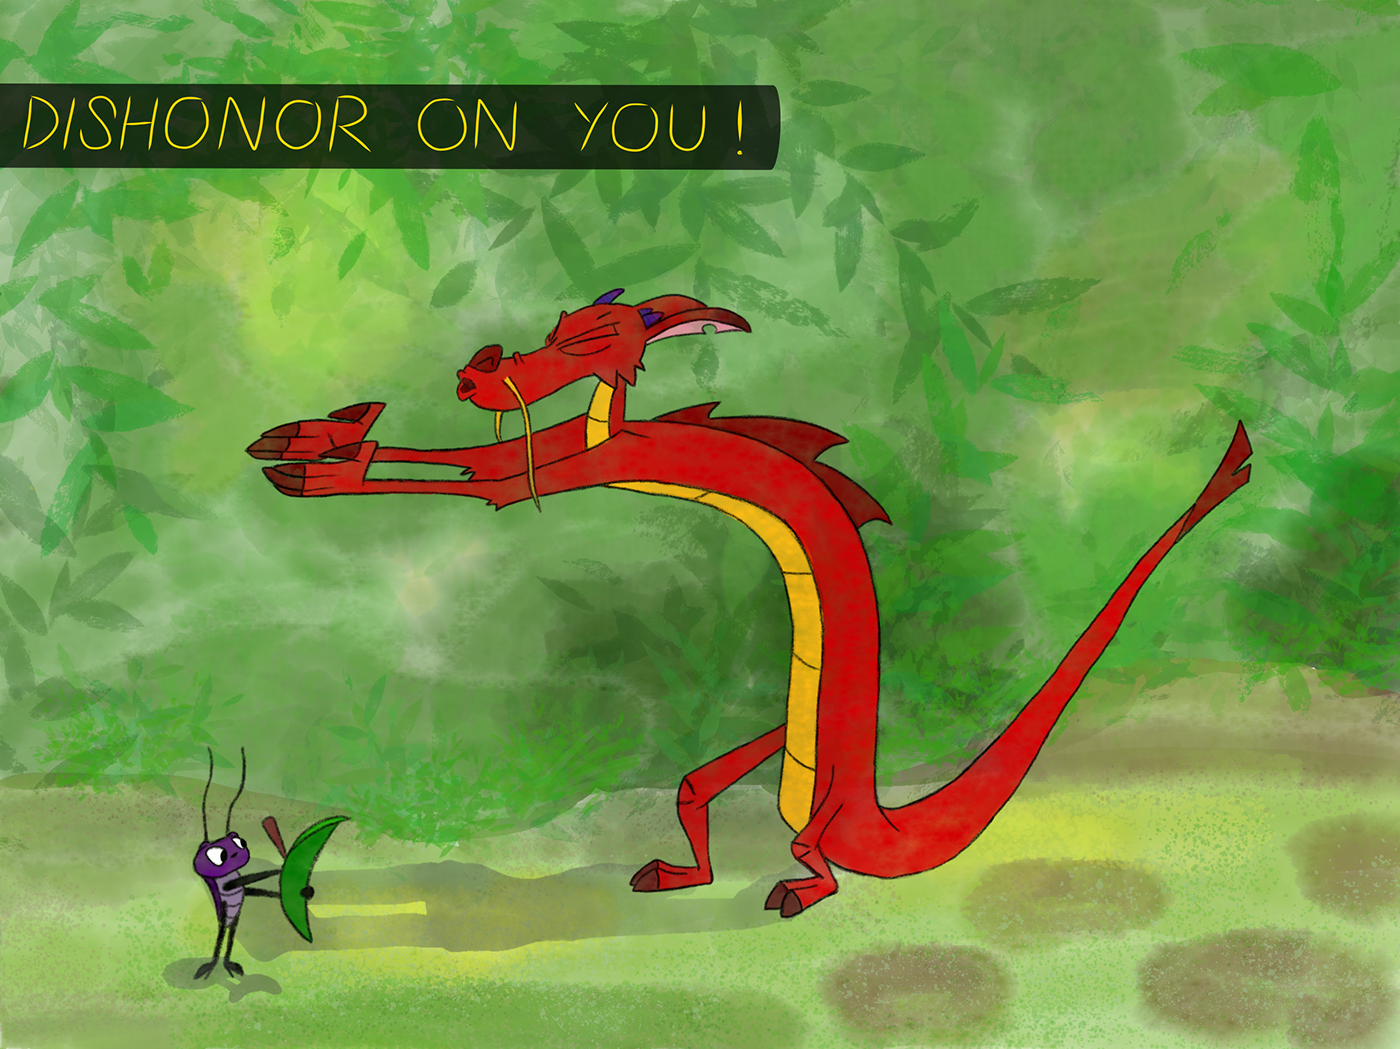 The "Dishonor" snippet of Mushu and Cricket from Disney&a...